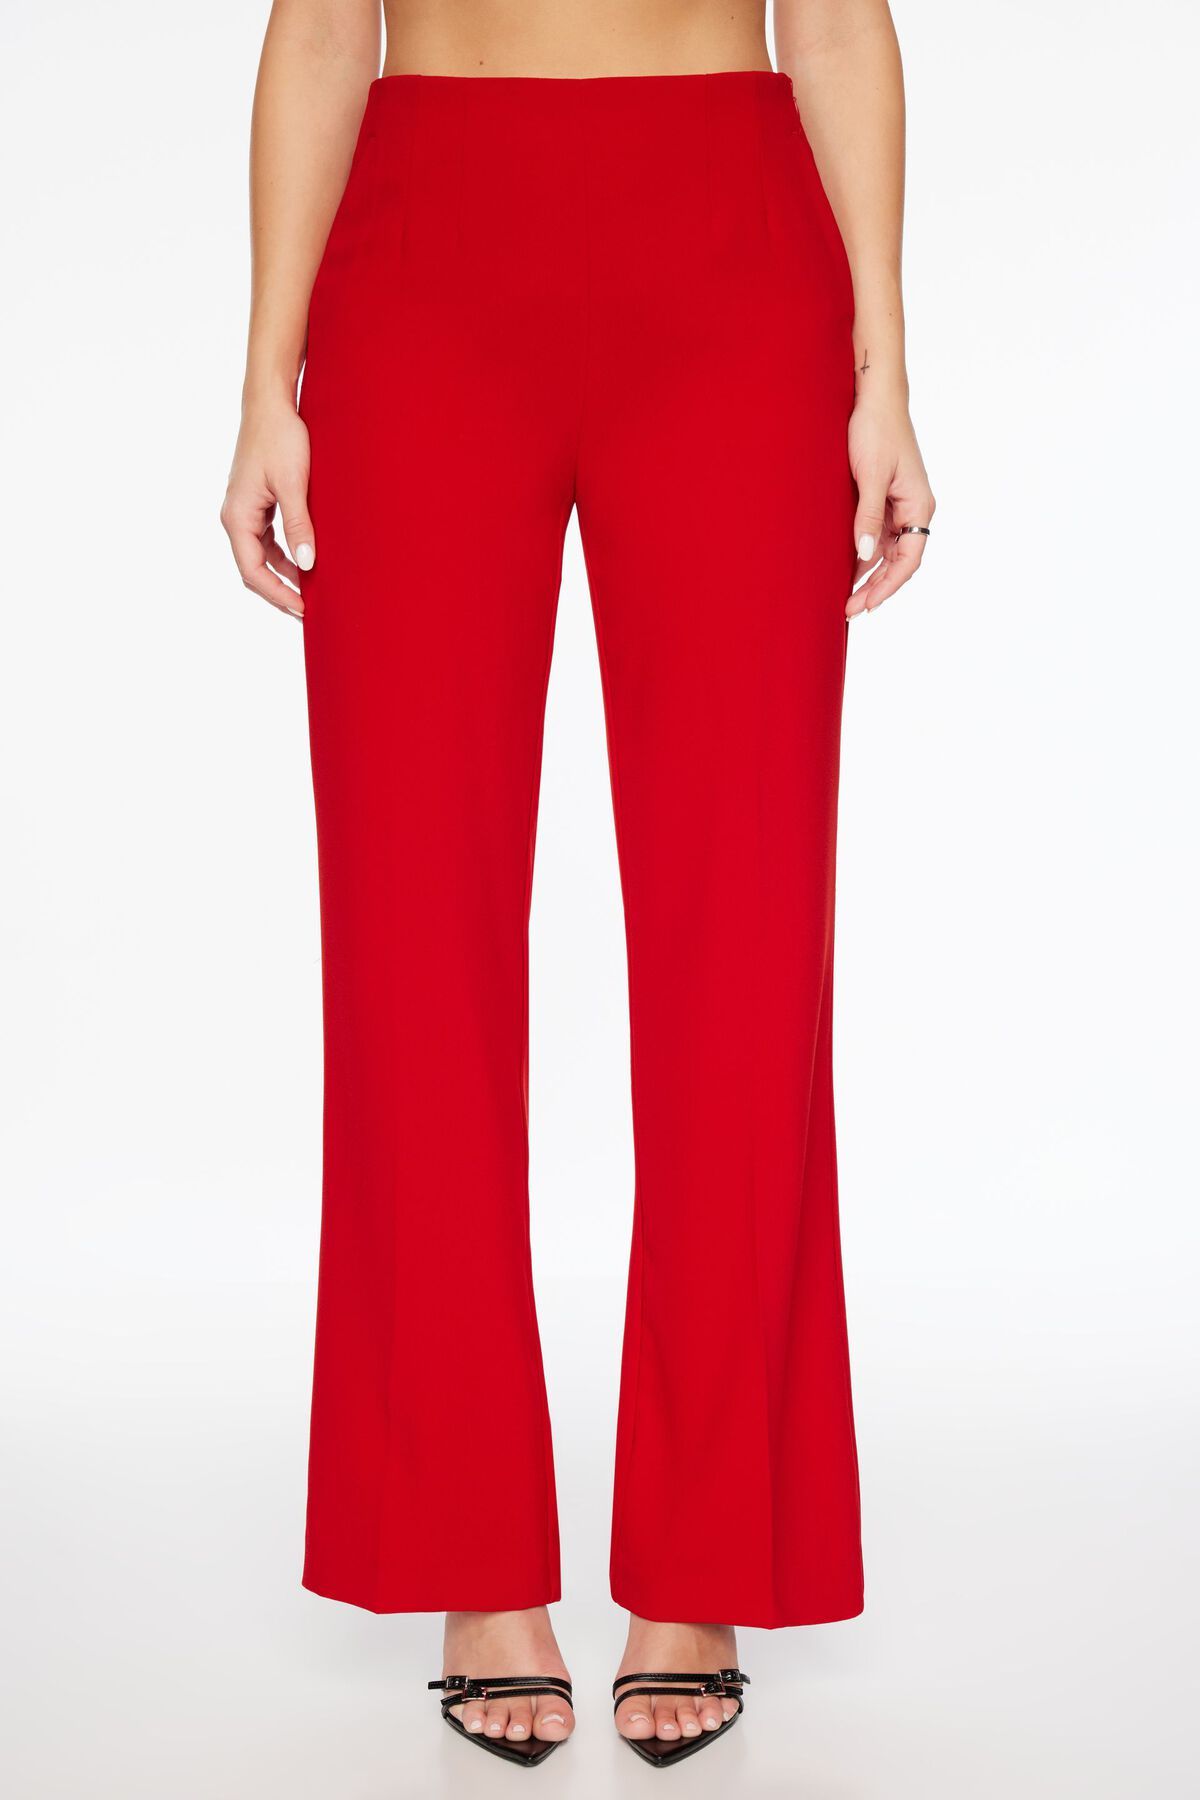 The Haute Boutik Red Pleated Wide Leg Pants is our store's newly launched  2021 product on Haute Boutik Elegant shop